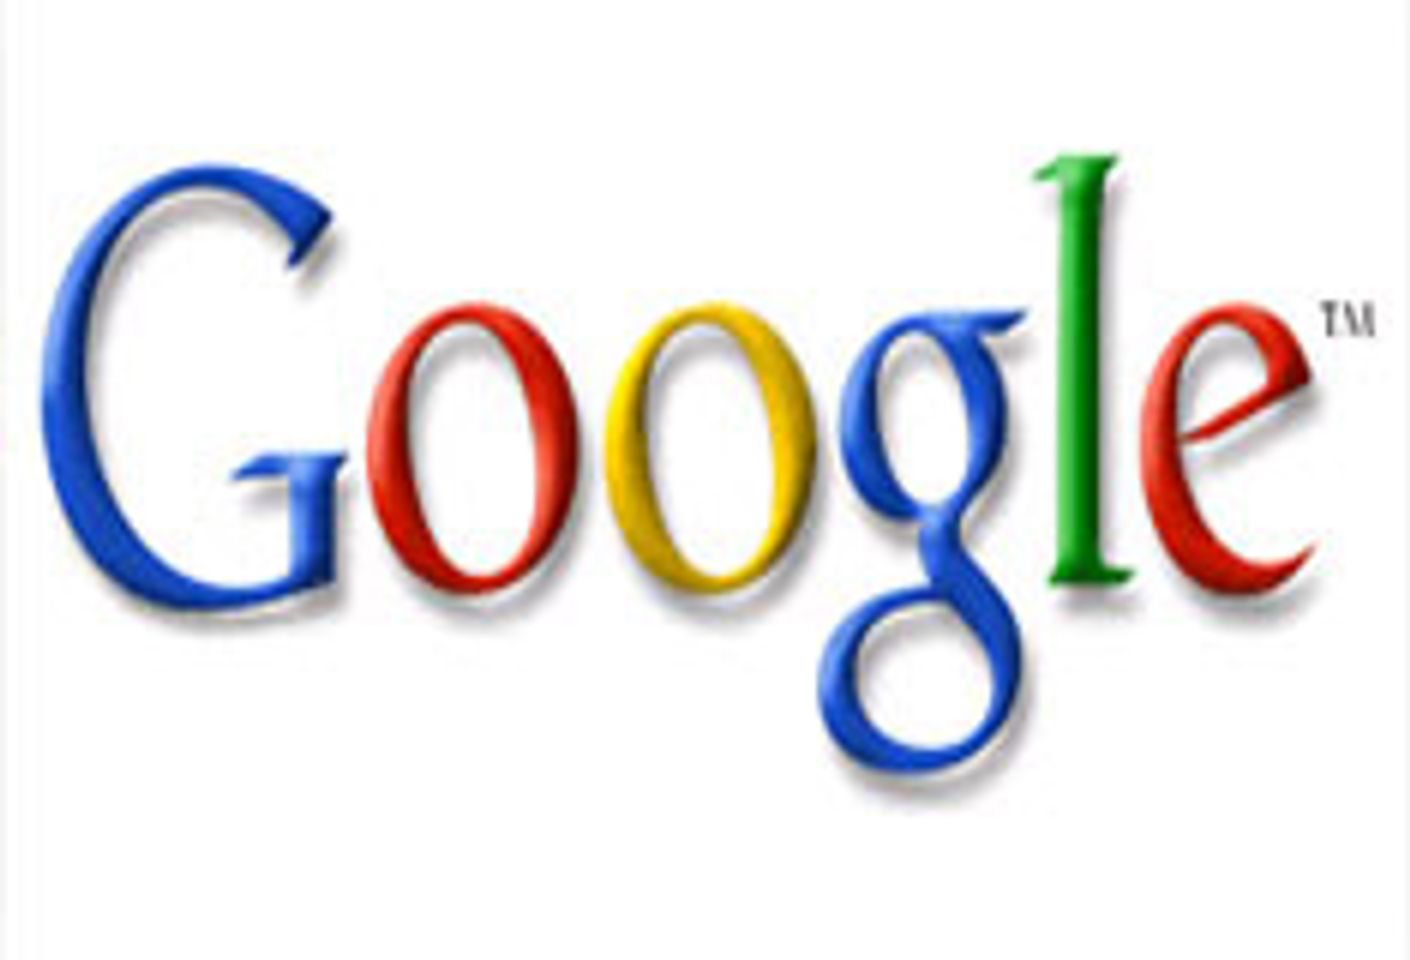 Google Loses, May Appeal Breach of Trademark Ruling